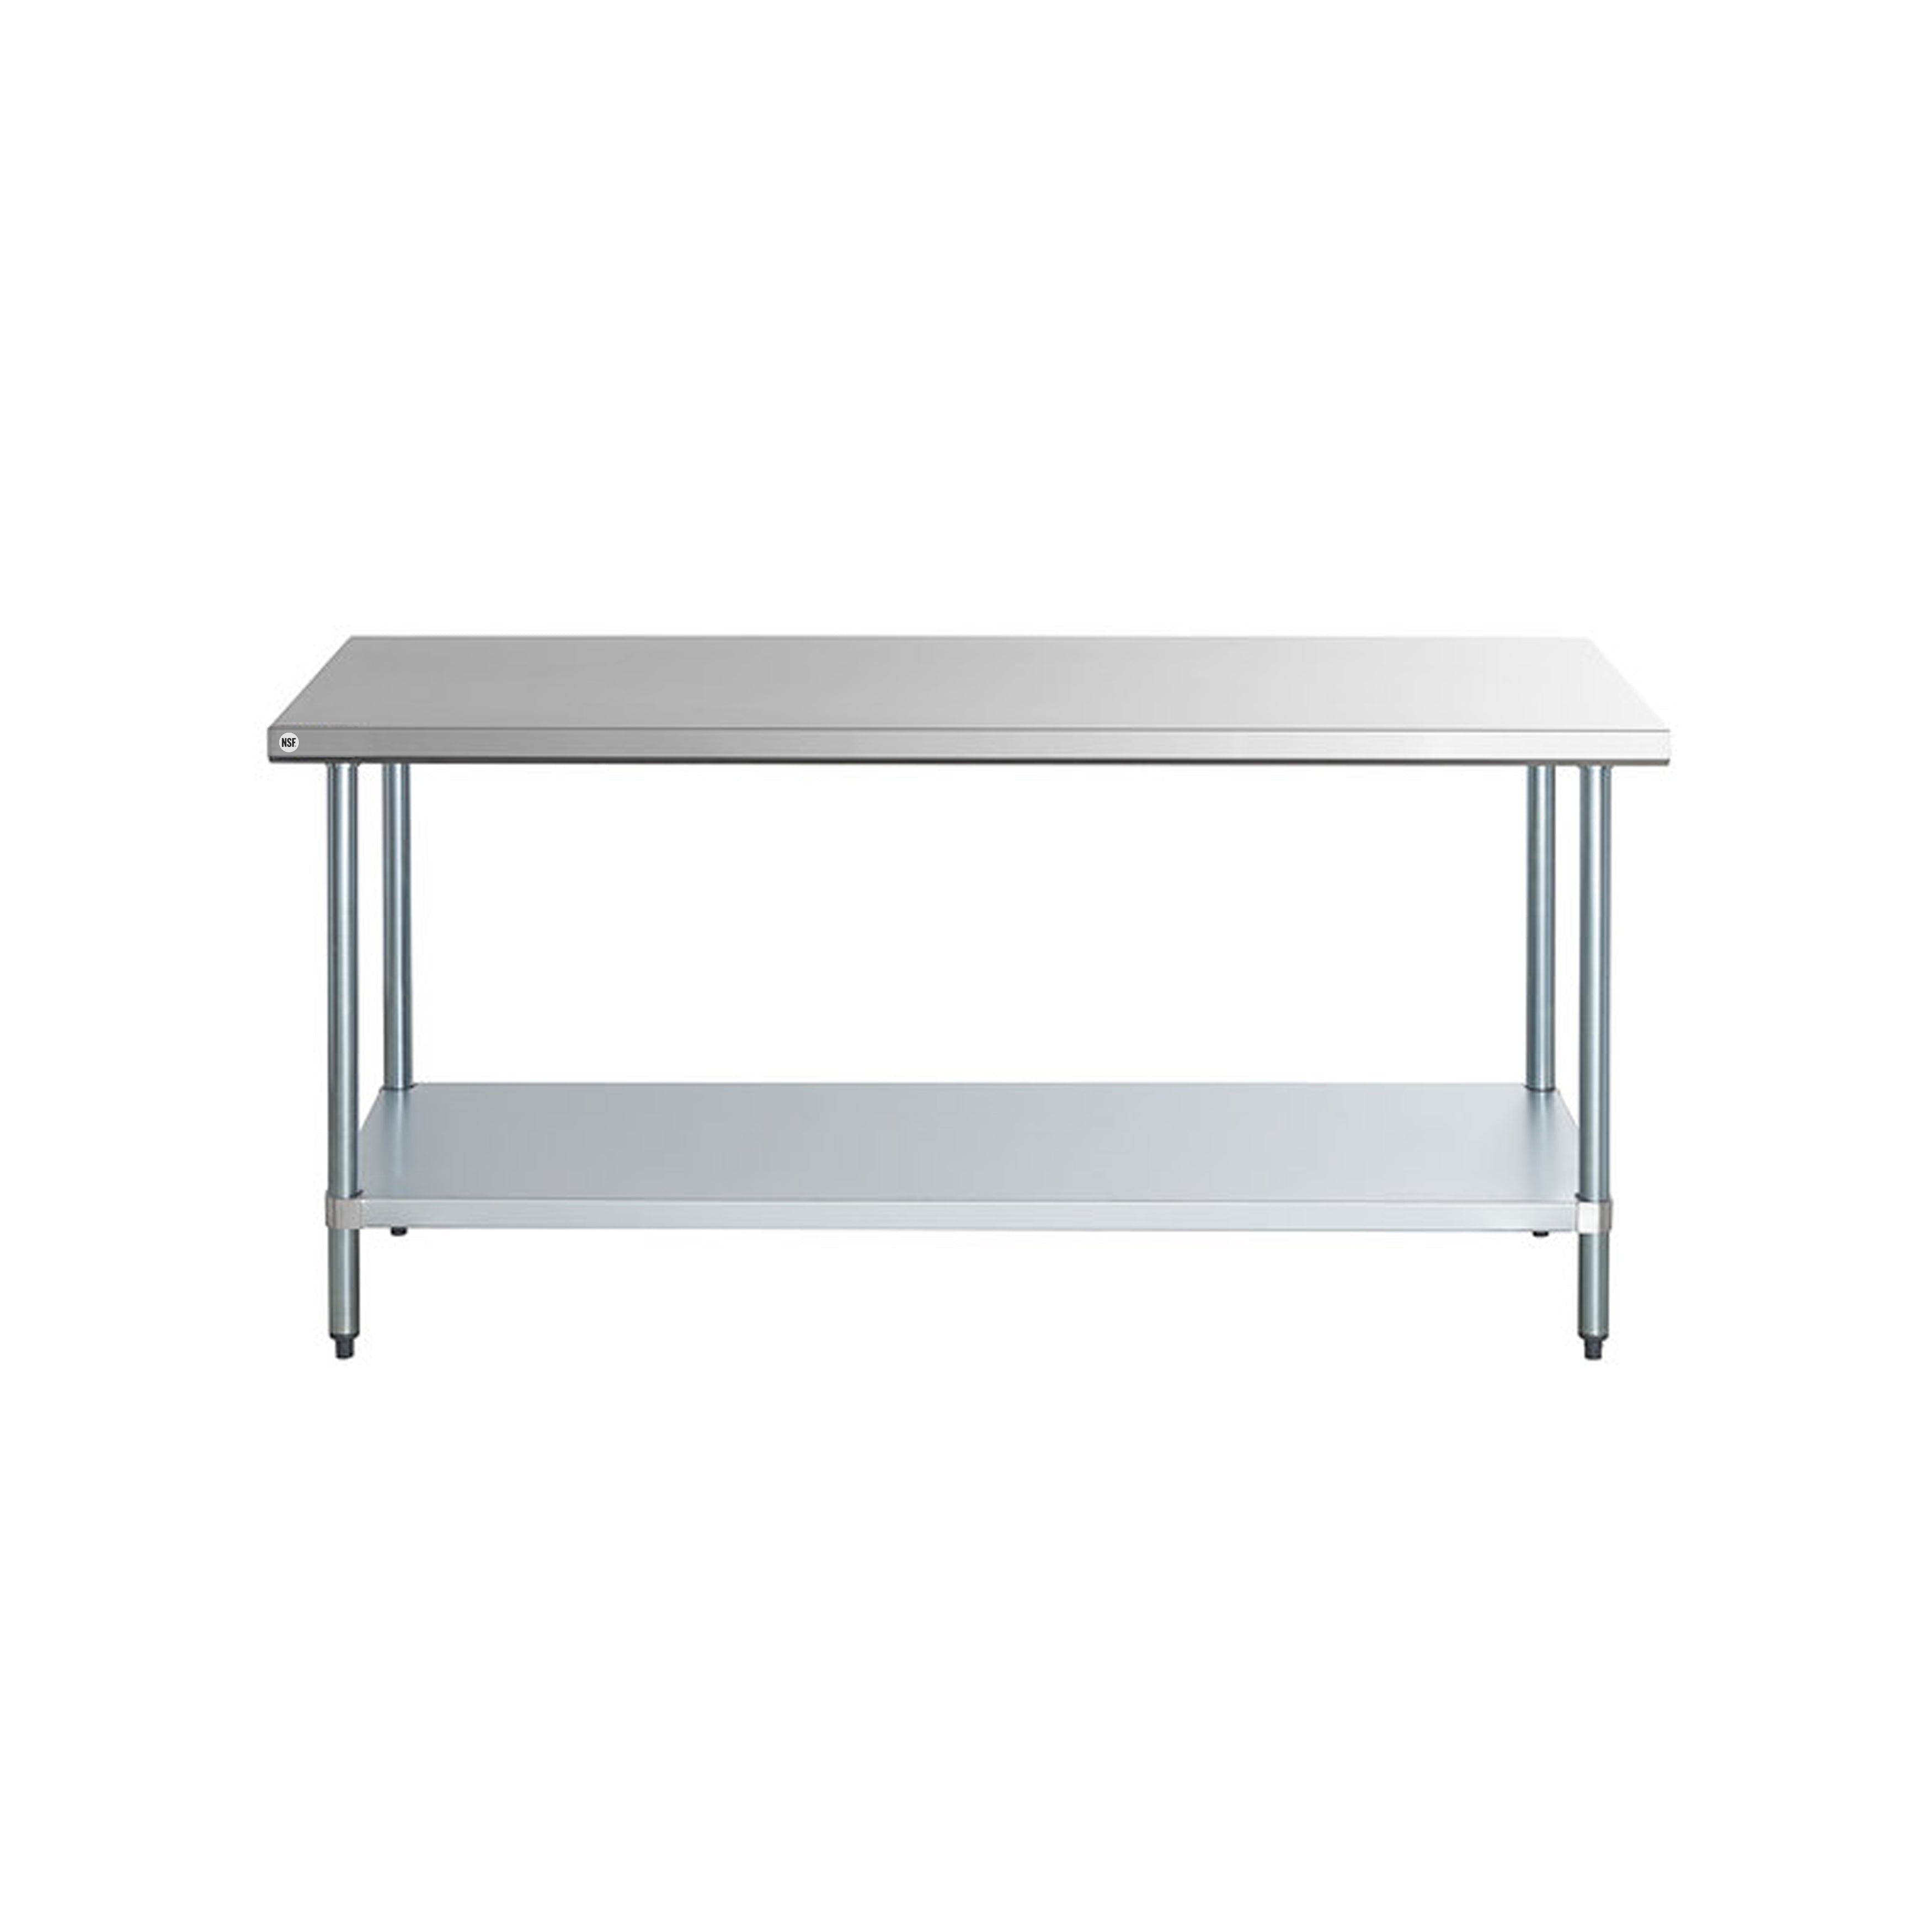 Omcan - 17580, Commercial 48" x 24" Stainless Steel Kitchen Work Table 1000lbs Medium Duty